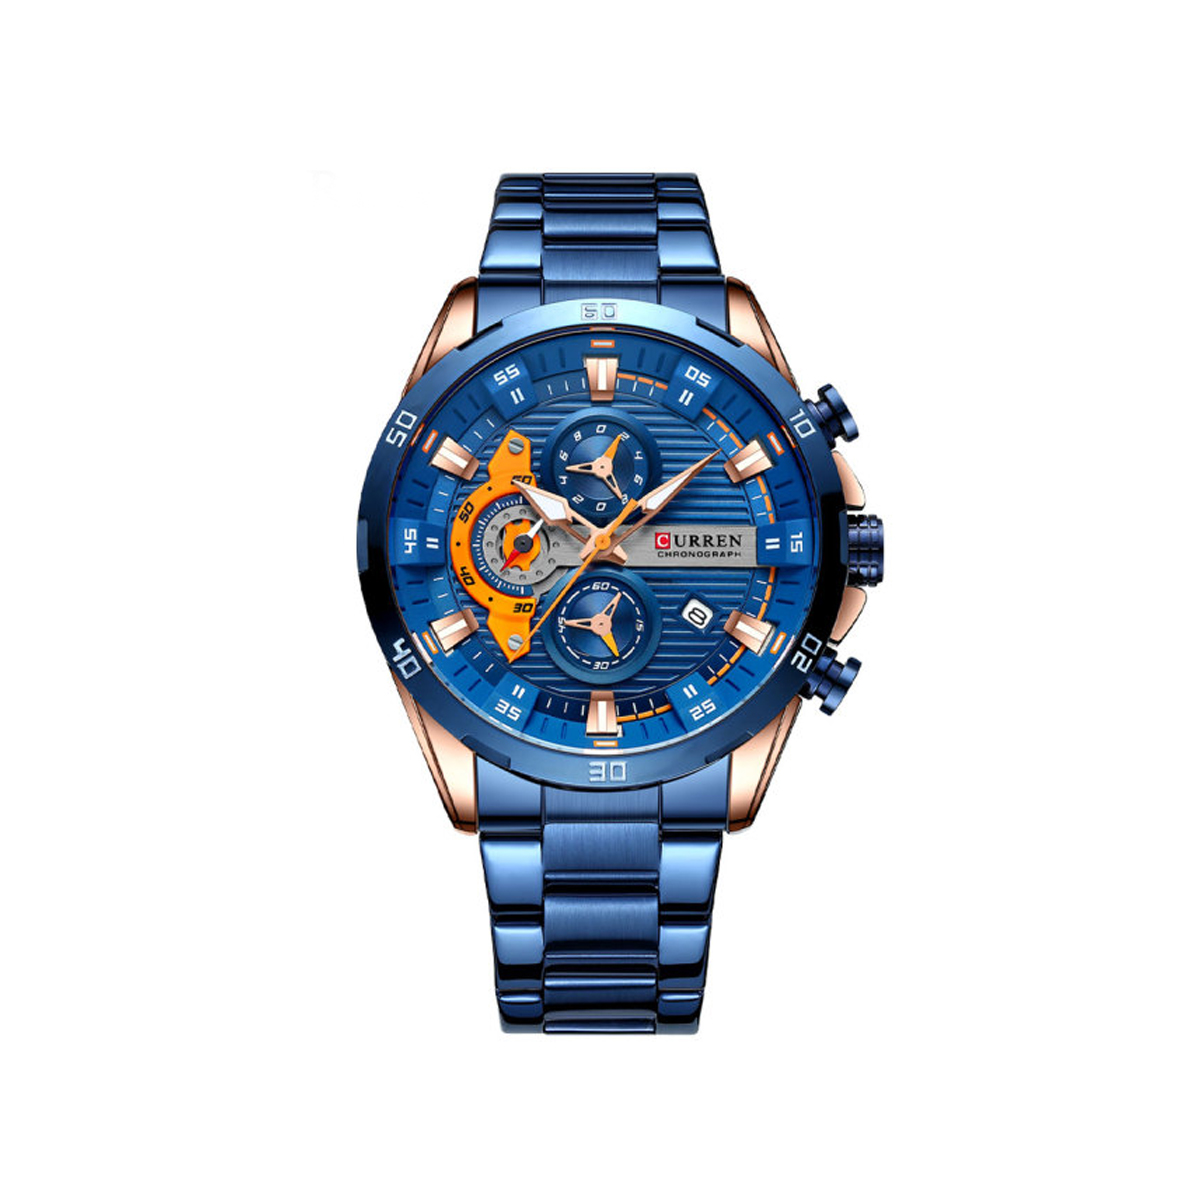 CURREN 8402 Chronograph Stainless Steel Watch for Men – Blue